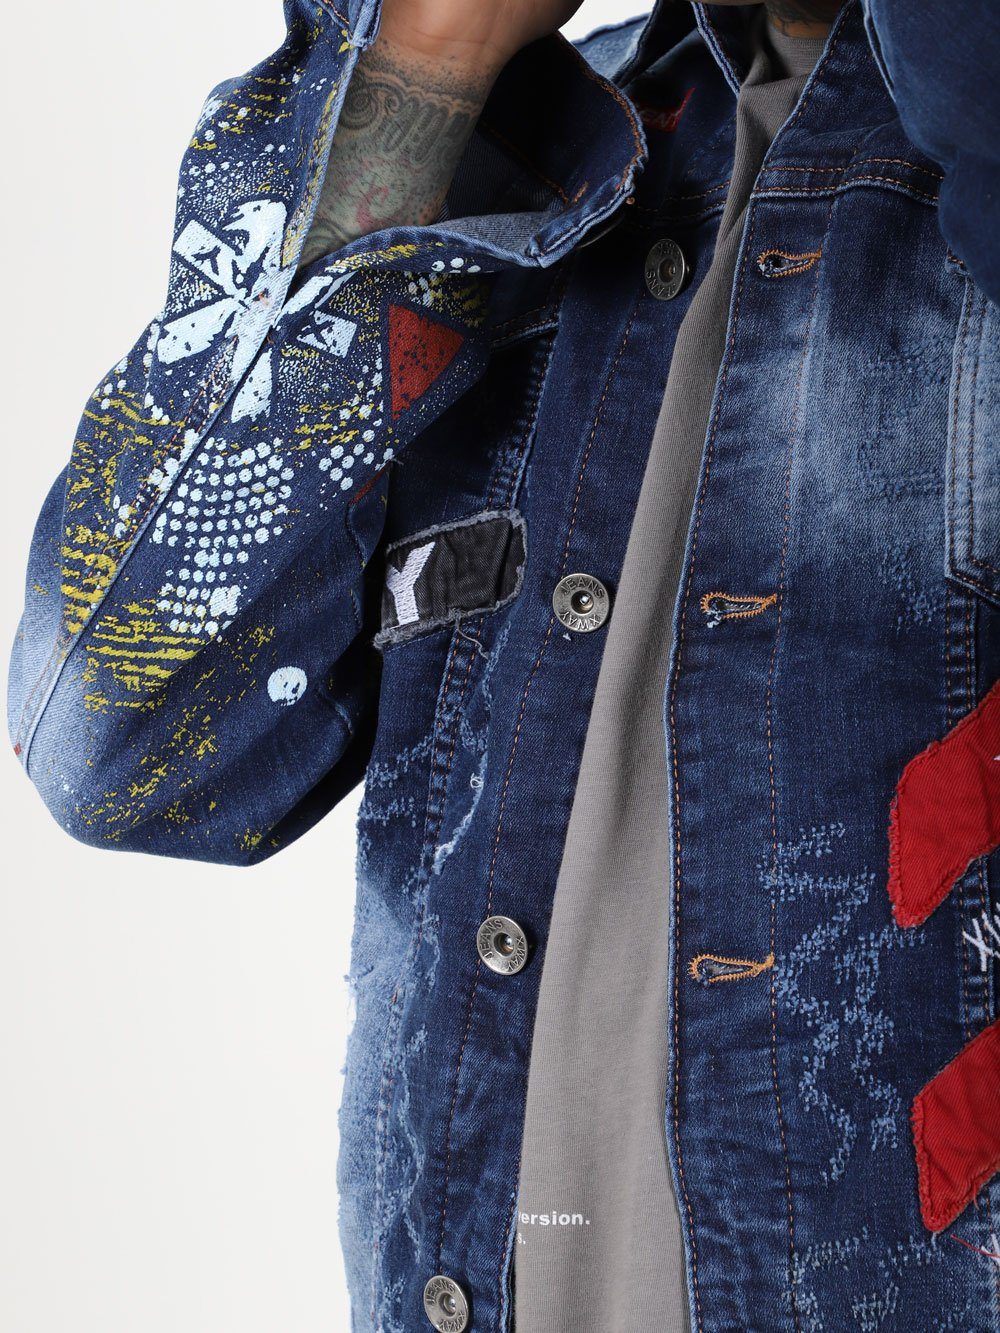 A man wearing an OLD PAINTING denim jacket with embroidered designs.